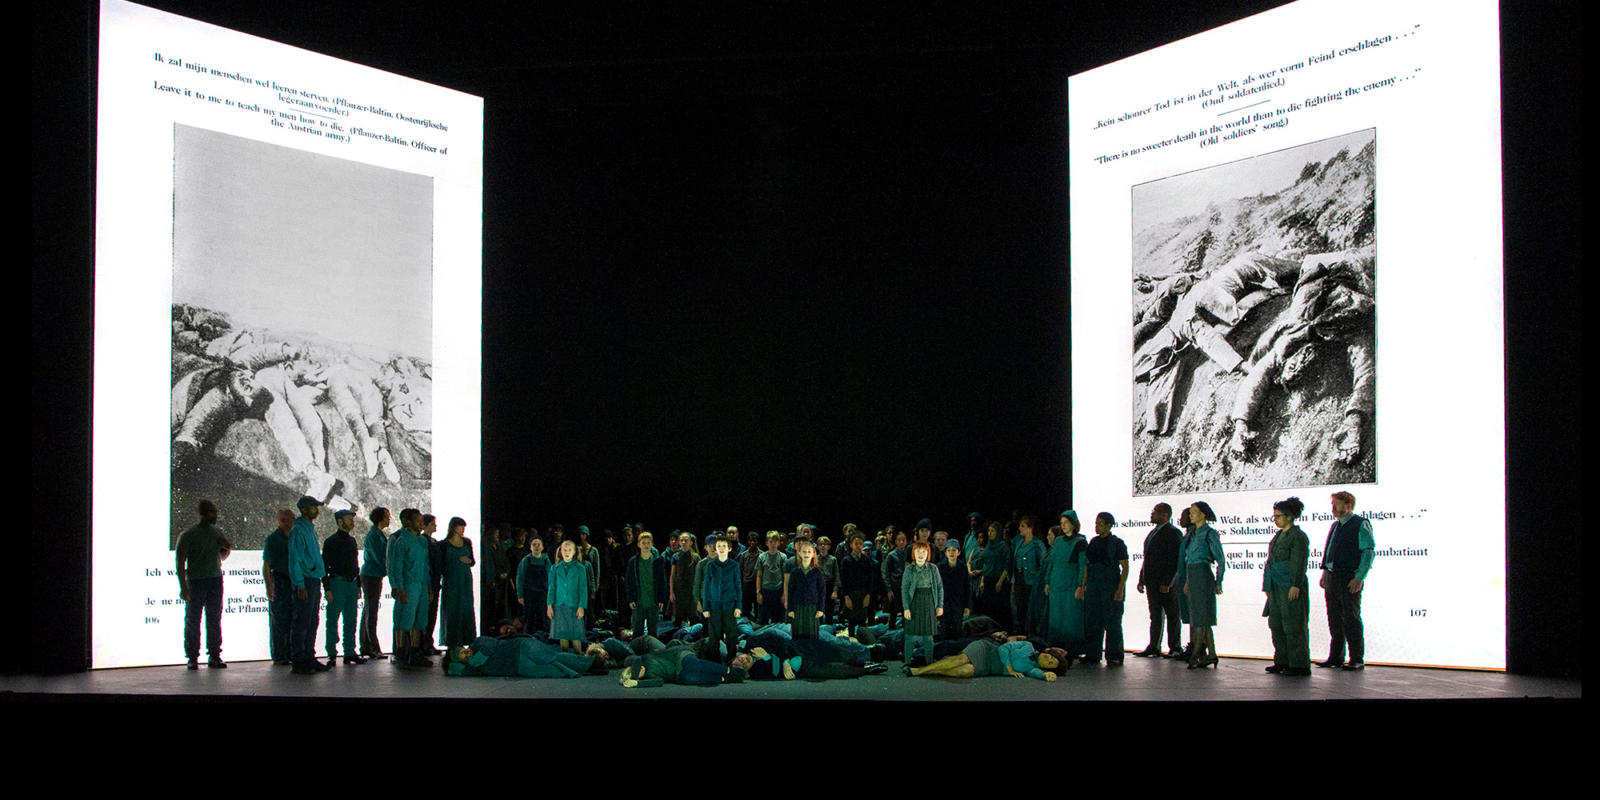 Ensemble of War Requiem stood on stage with projections of a German anti-war pamphlet behind them